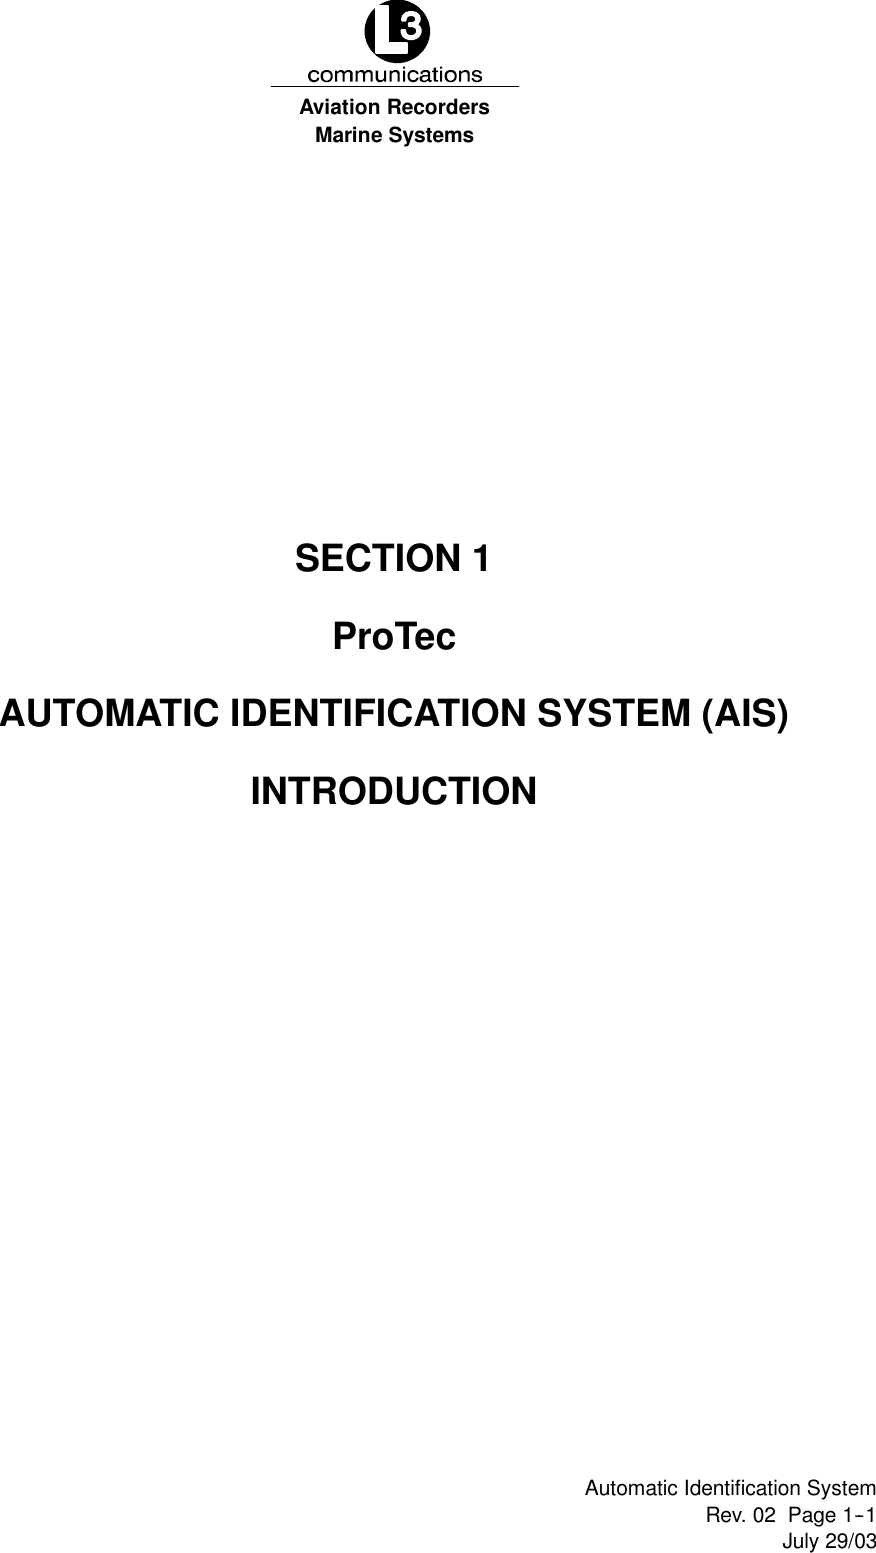 Marine SystemsAviation RecordersRev. 02 Page 1--1July 29/03Automatic Identification SystemSECTION 1ProTecAUTOMATIC IDENTIFICATION SYSTEM (AIS)INTRODUCTION